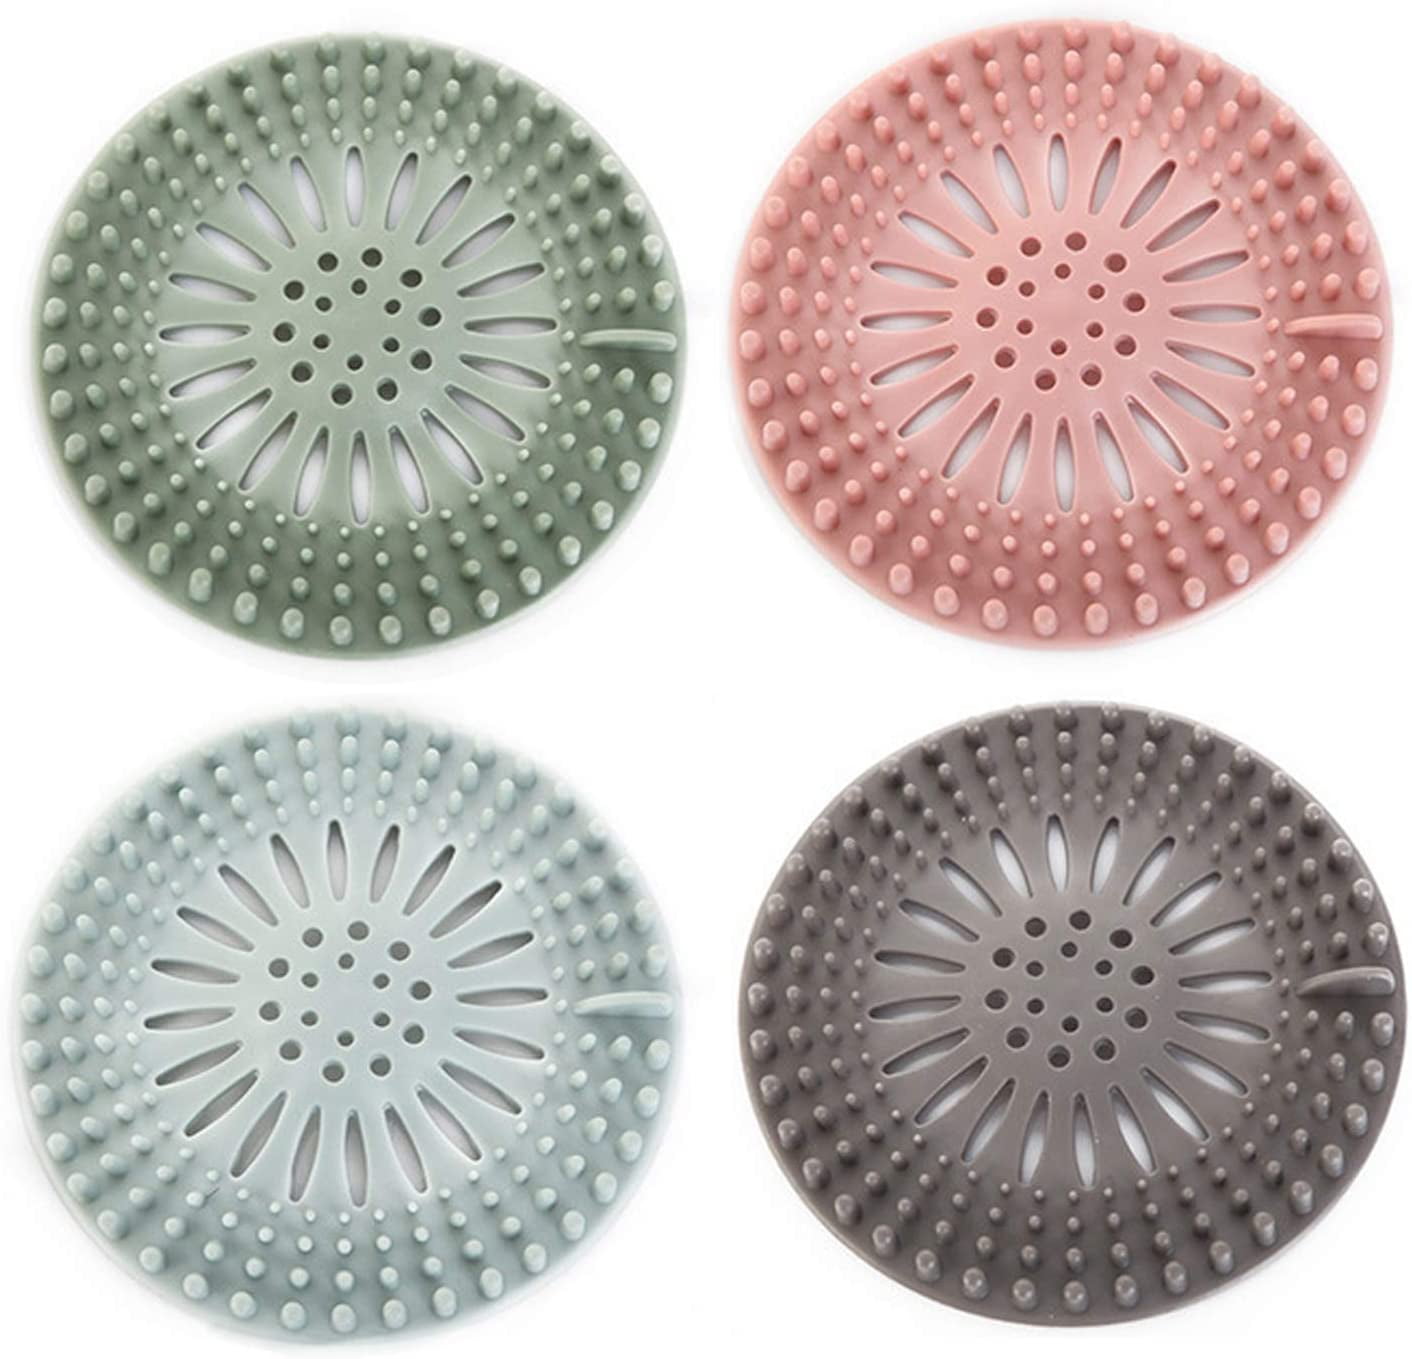 Hair Catcher Durable Silicone Hair Stopper Shower Drain Covers Easy to Install and Clean Suit for Bathroom Bathtub and Kitchen 5 Pack 